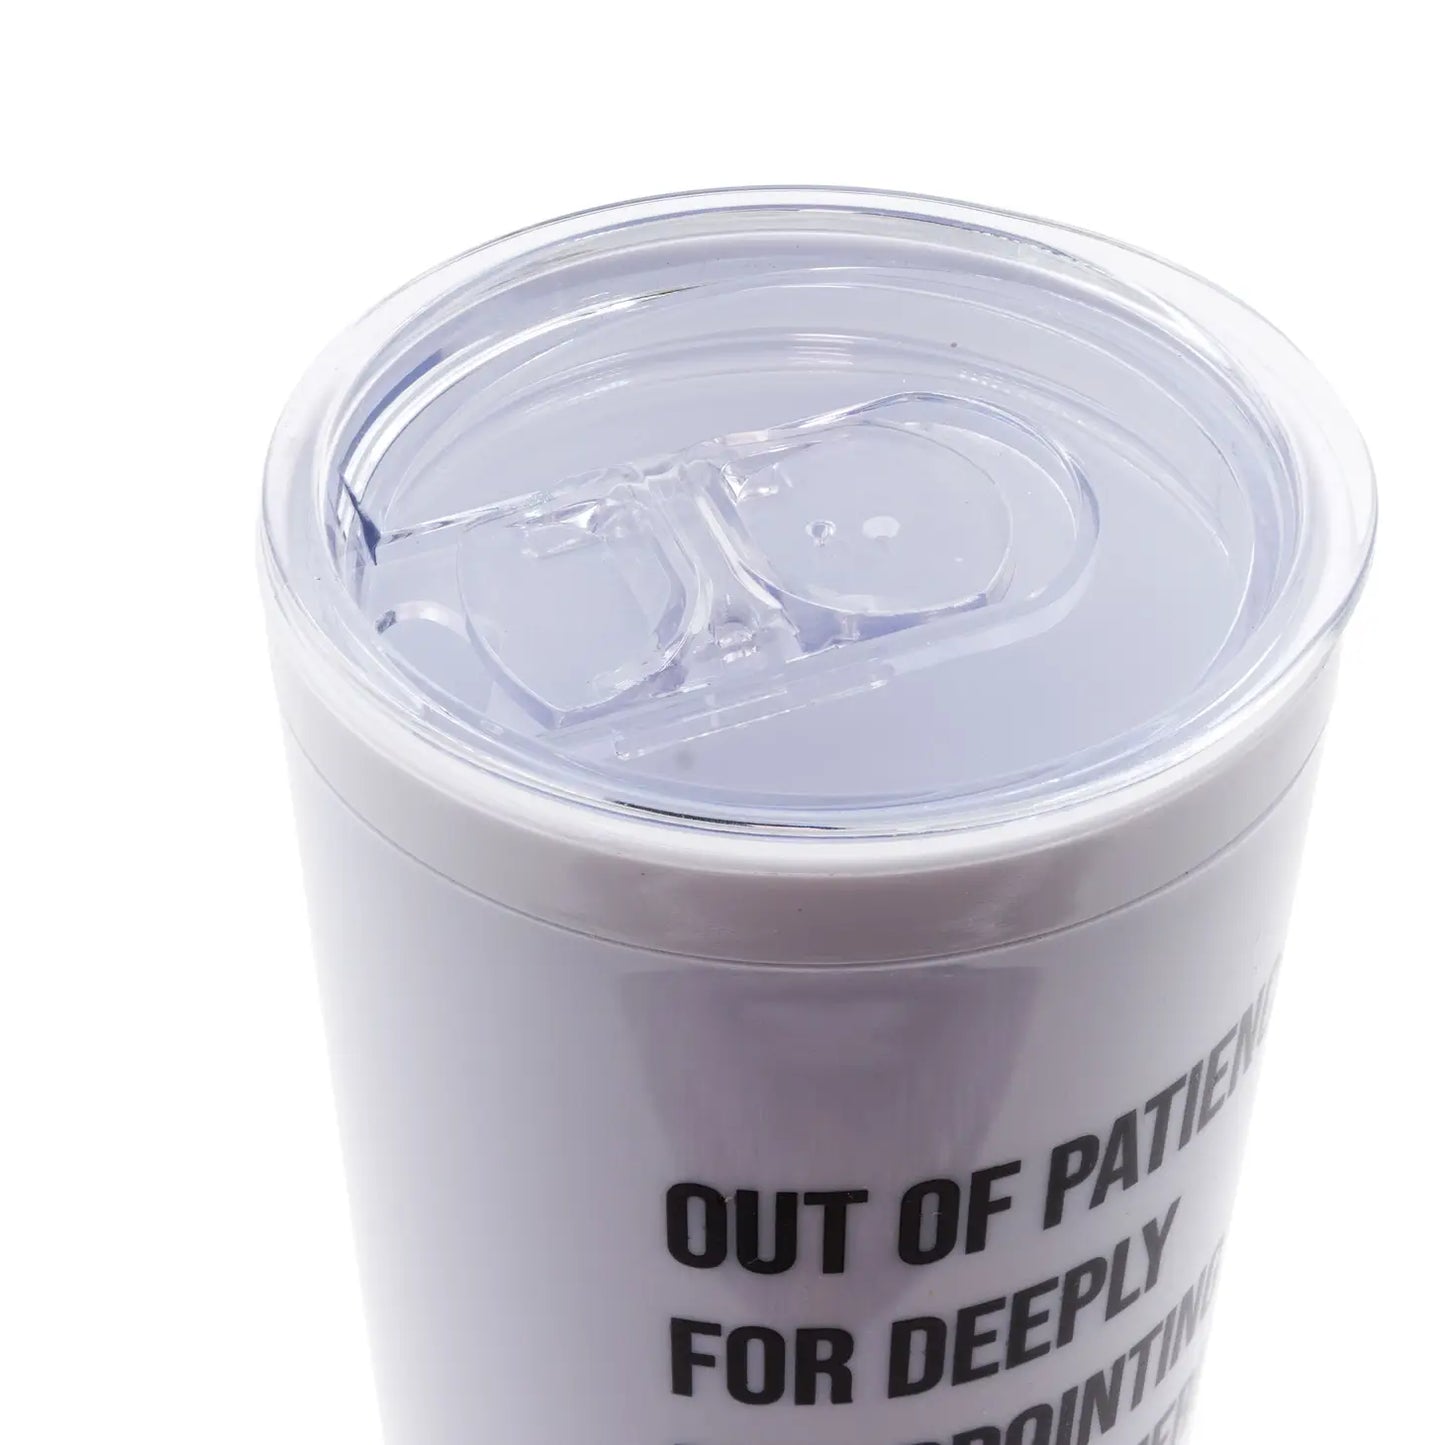 Out of Patience For Deeply Disappointing Men Travel Mug (White)